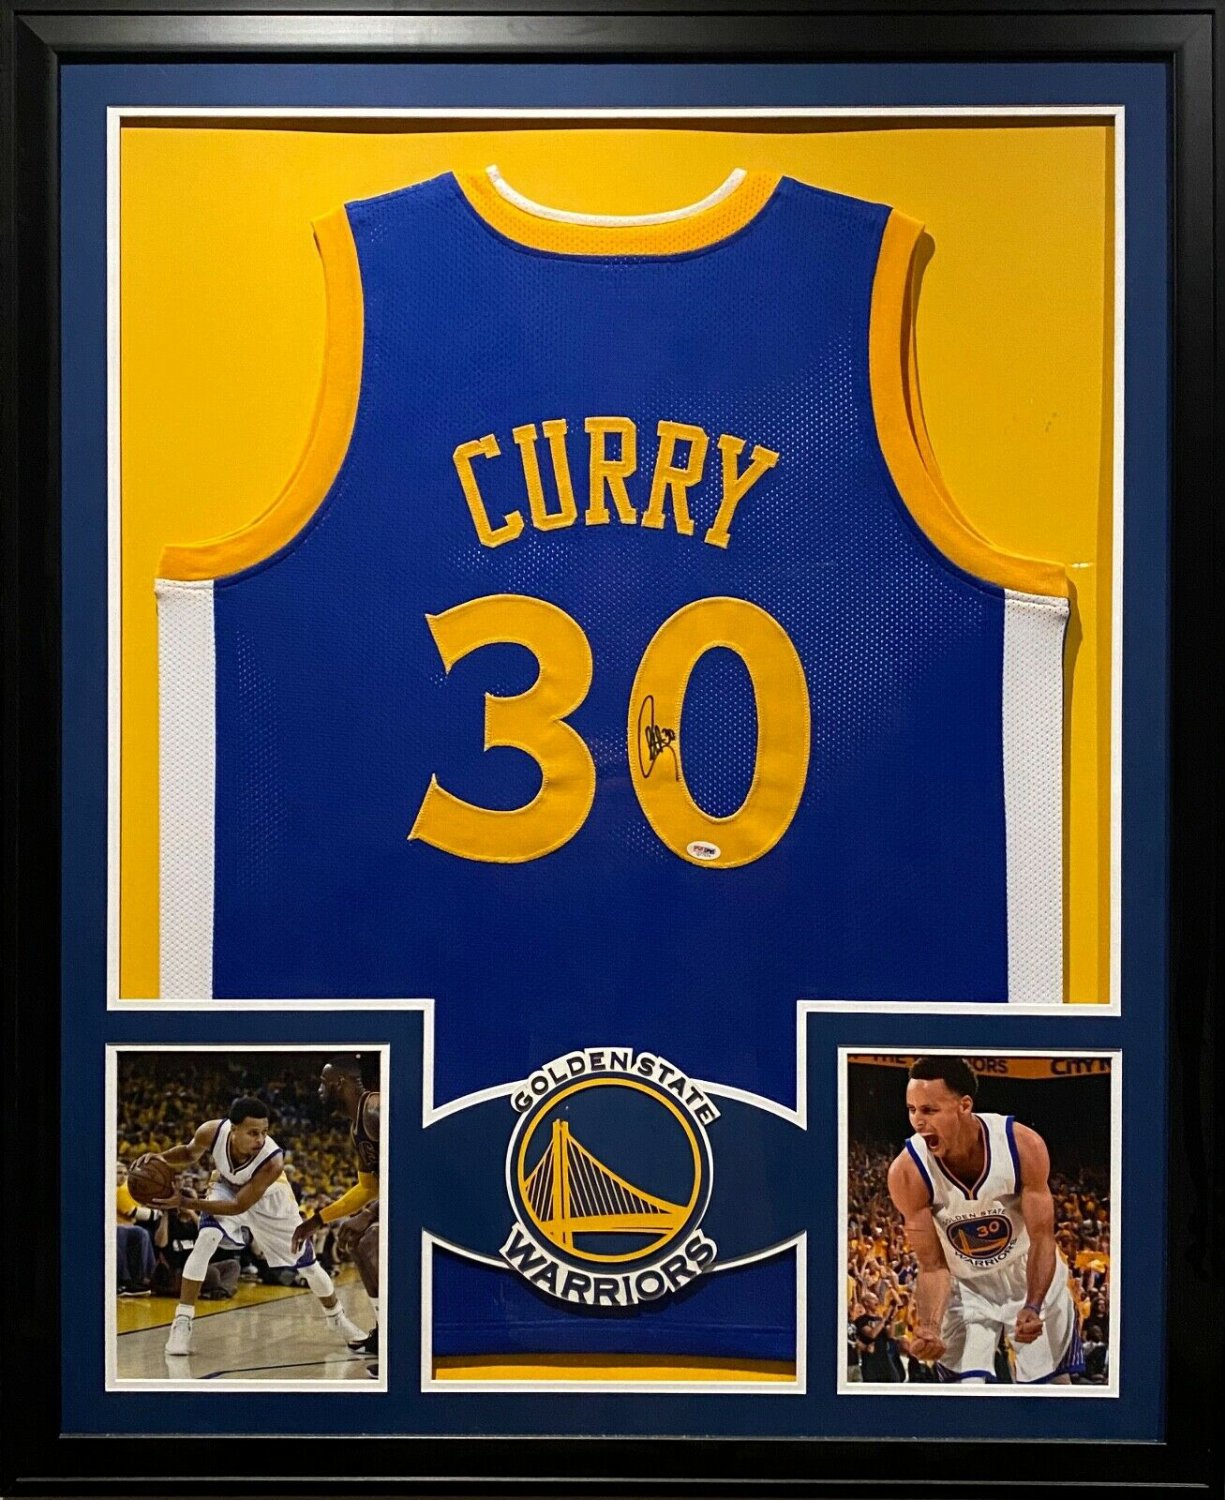 Steph Curry Autographed Signed Framed Jersey PSA/DNA Autograph Golden